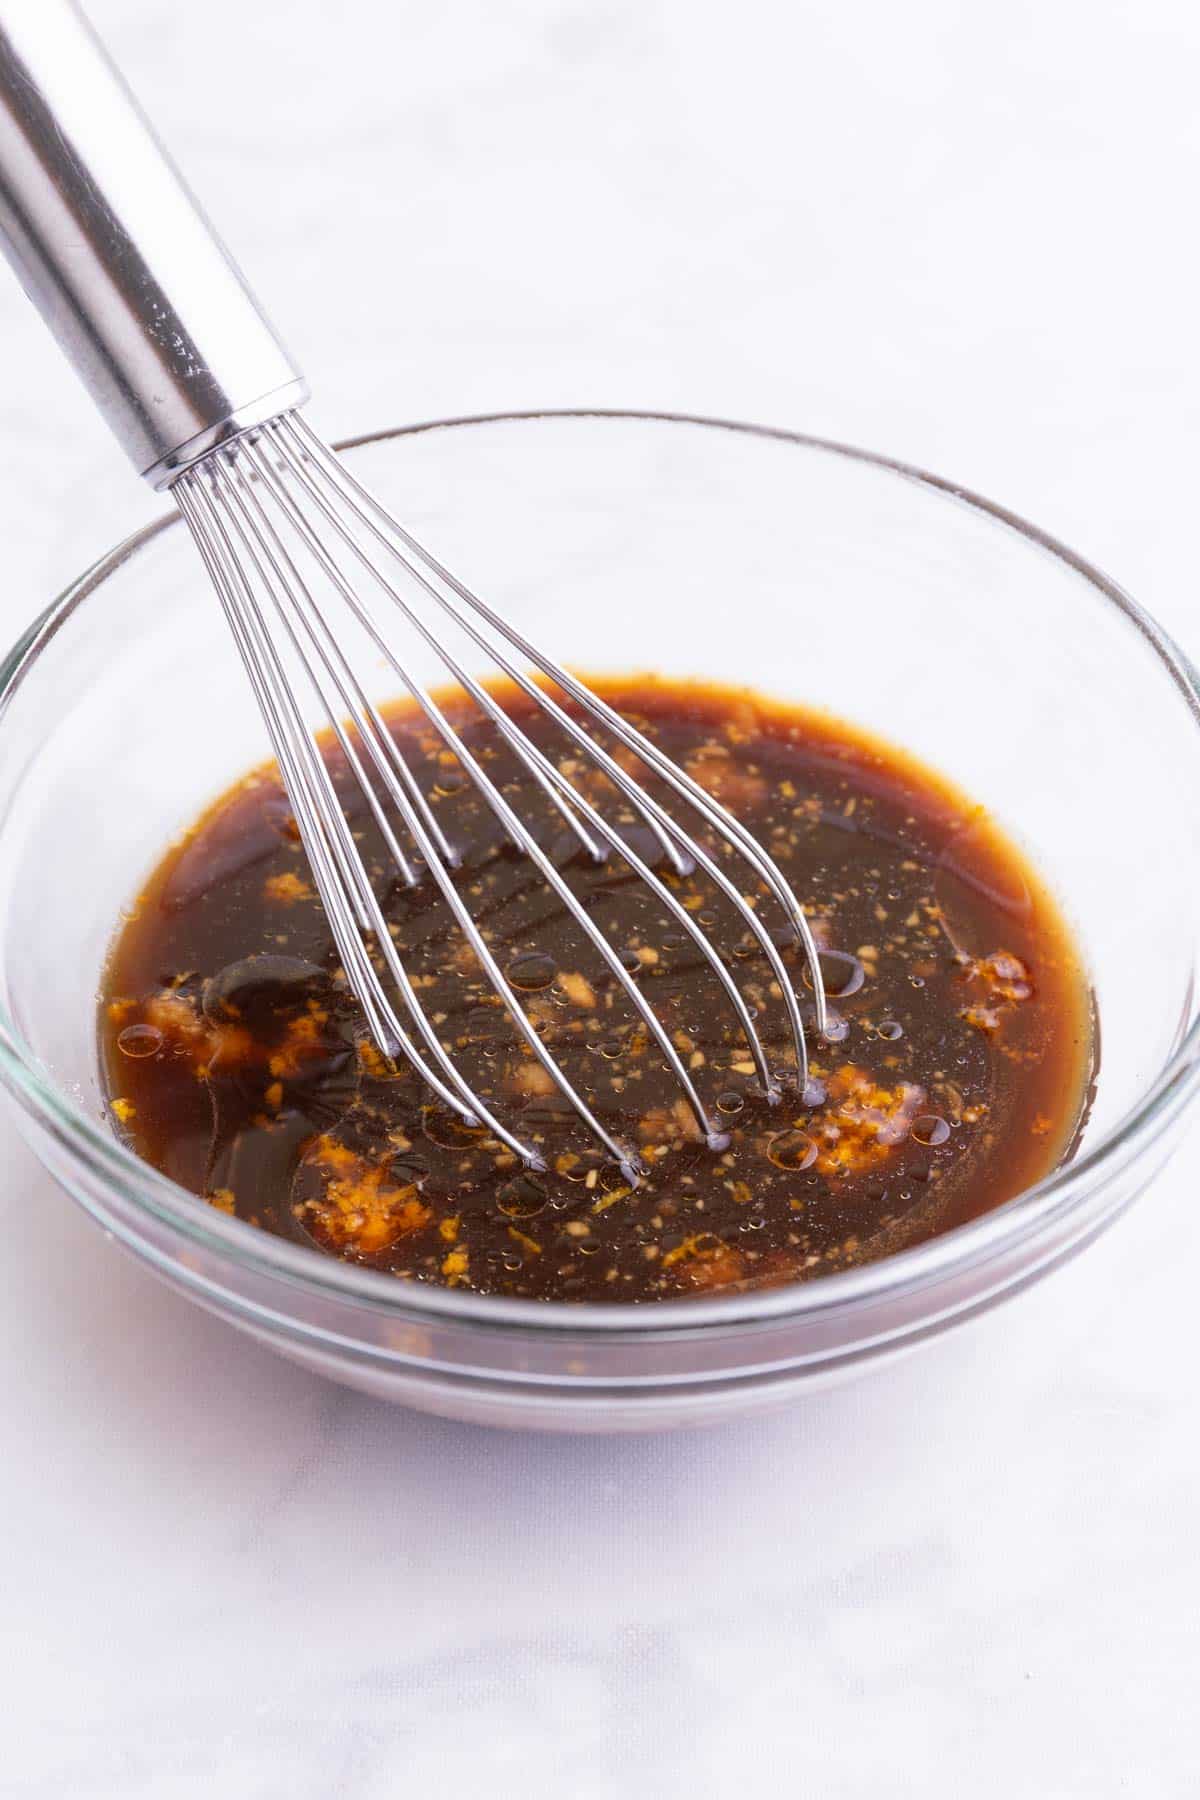 An orange sauce is whisked together in a glass bowl.